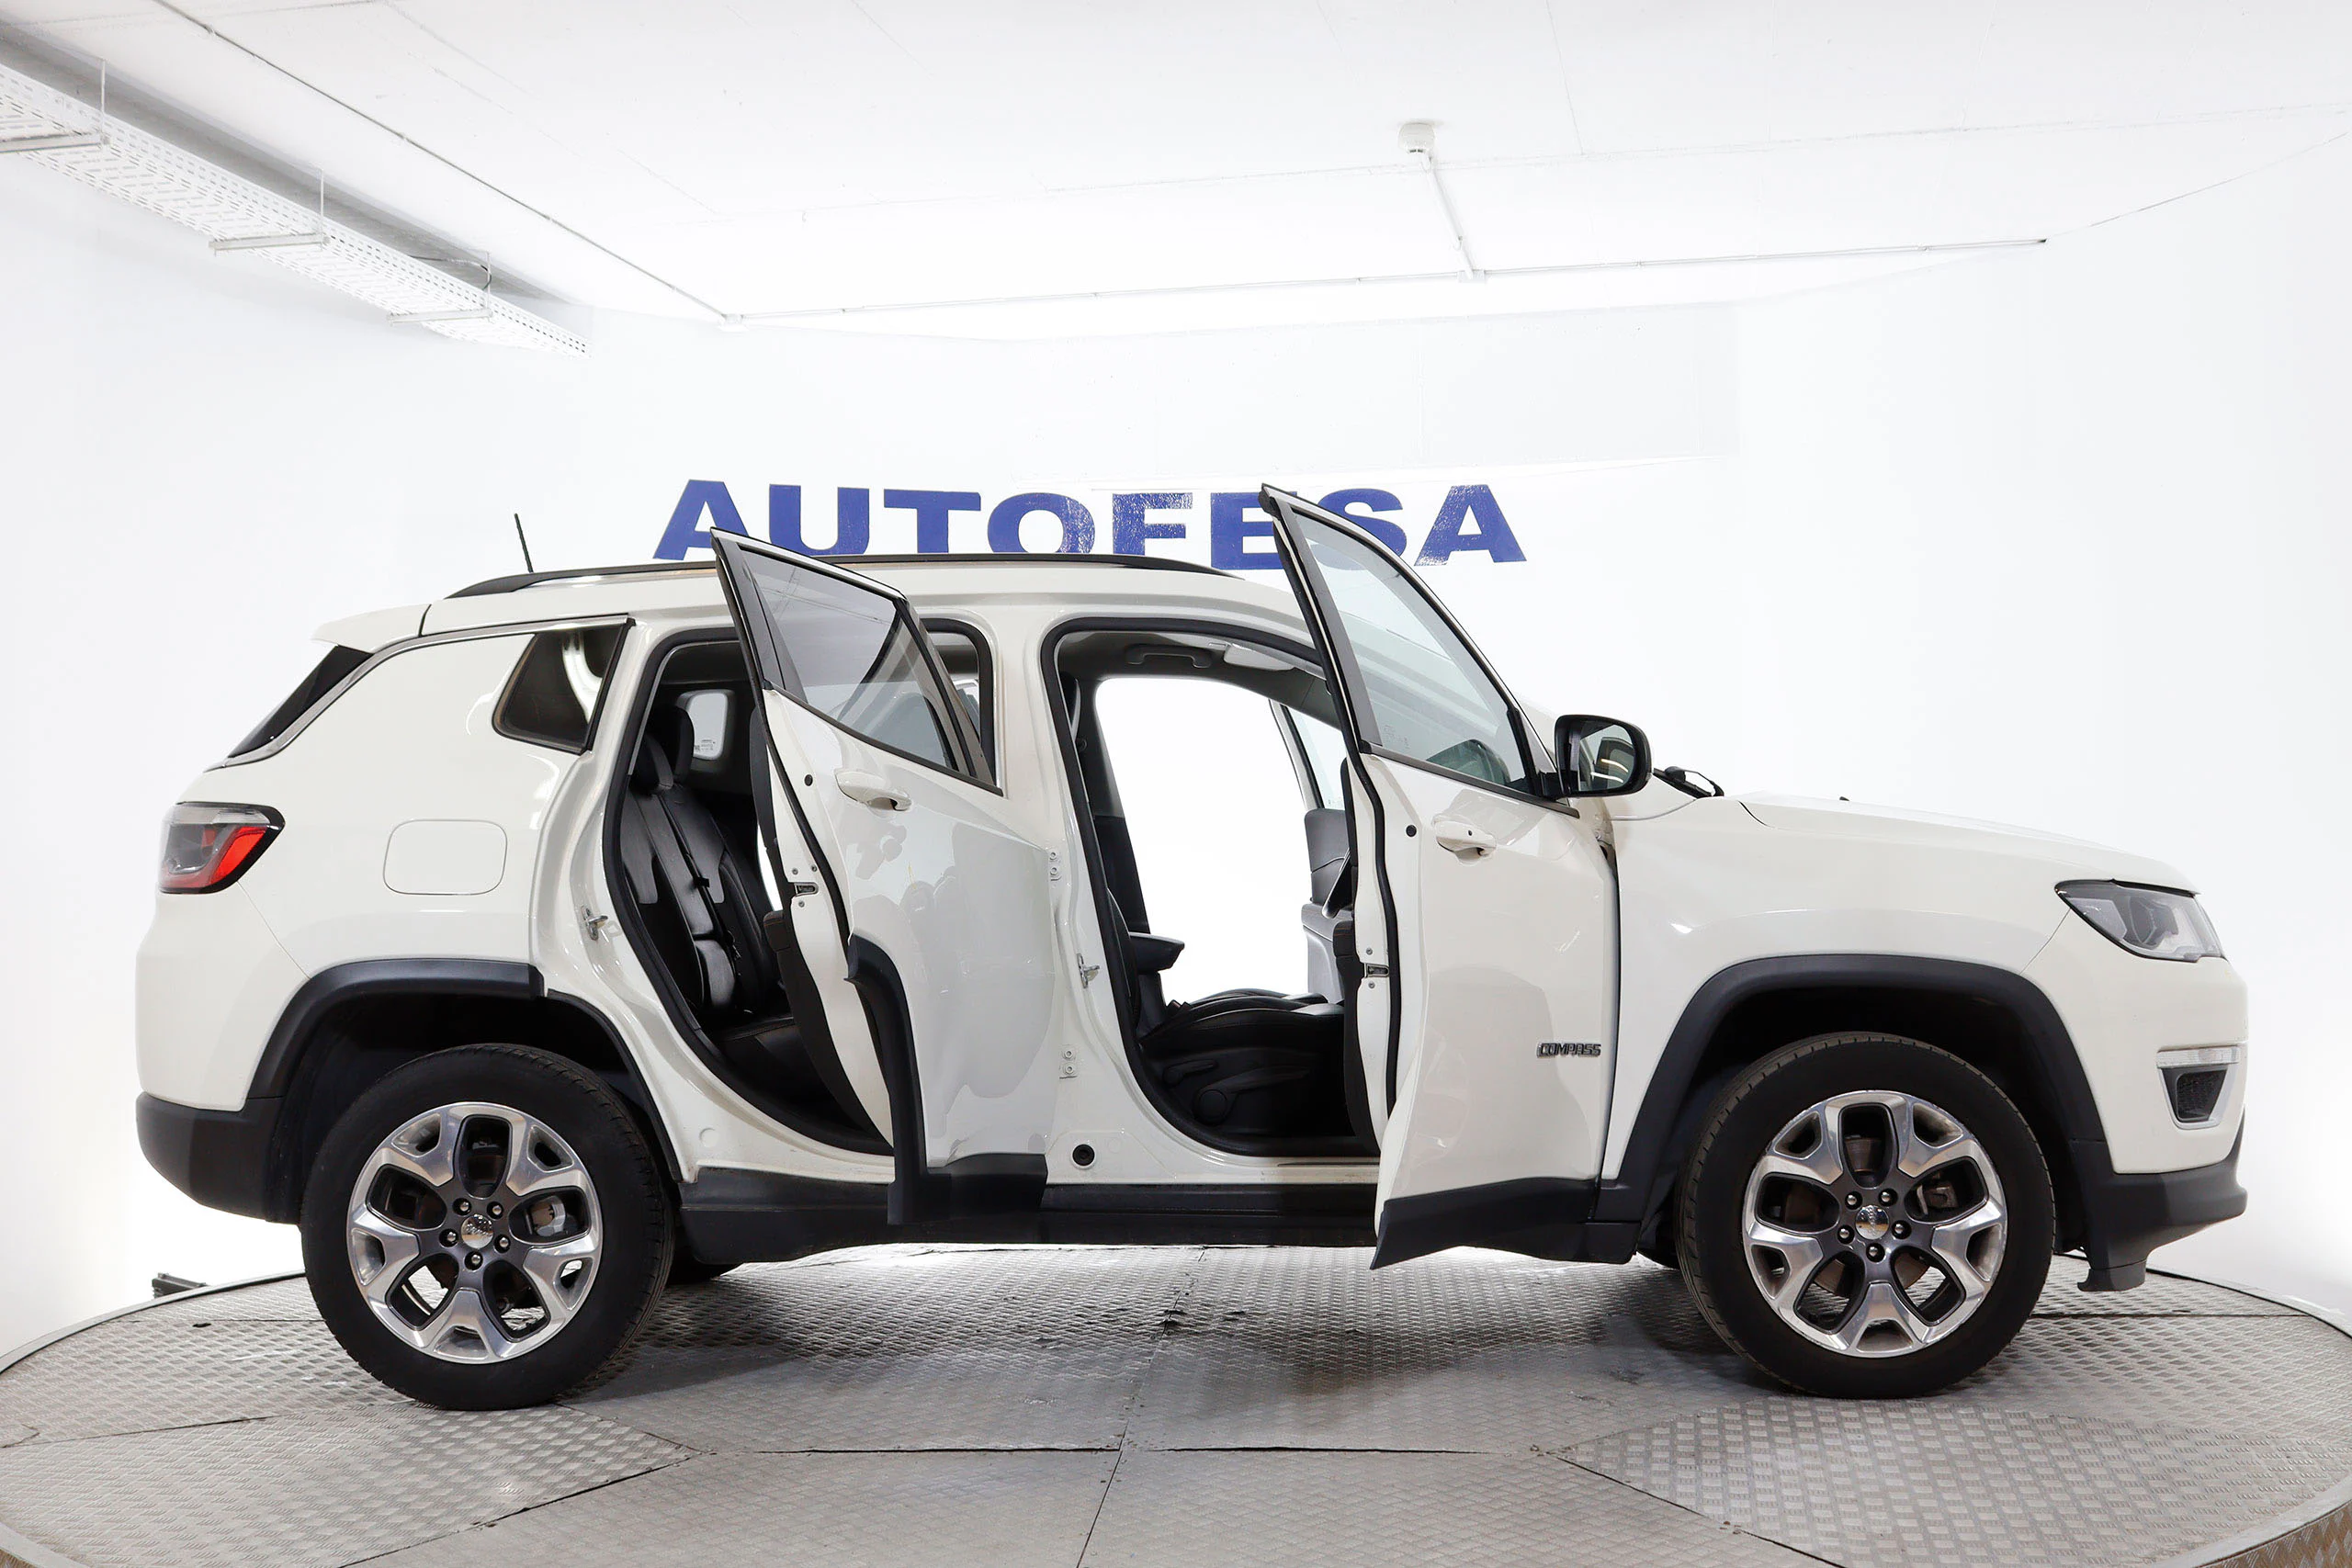 Jeep Compass 2.0 Limited 4X4 170cv Auto 5P S/S # IVA DEDUCIBLE, NAVY, FAROS LED, PARKTRONIC - Foto 11